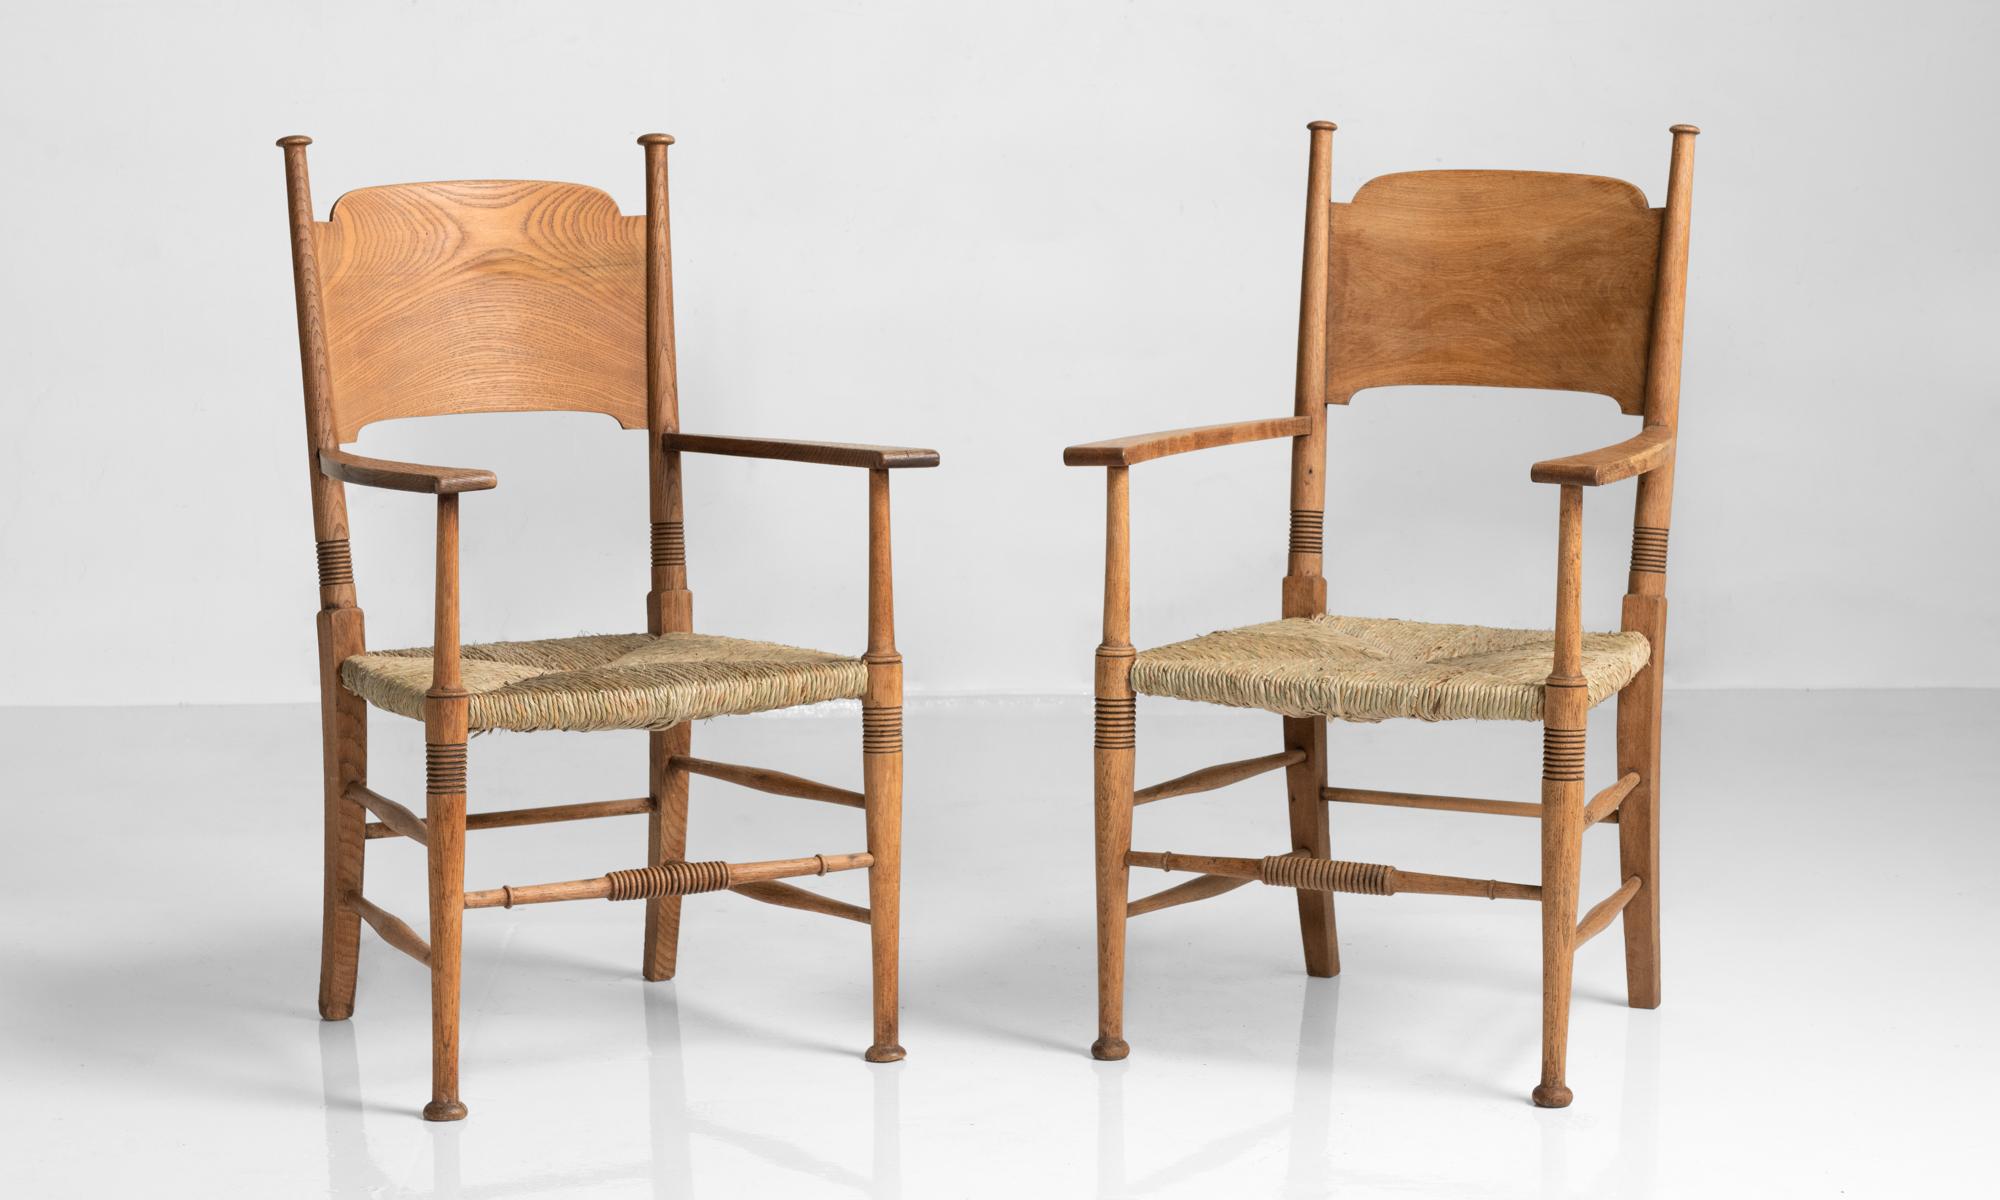 Oak Armchairs by William Birch, England, circa 1890

Solid oak frame with newly rushed seats. Designed by William Birch and produced in High Wycombe.